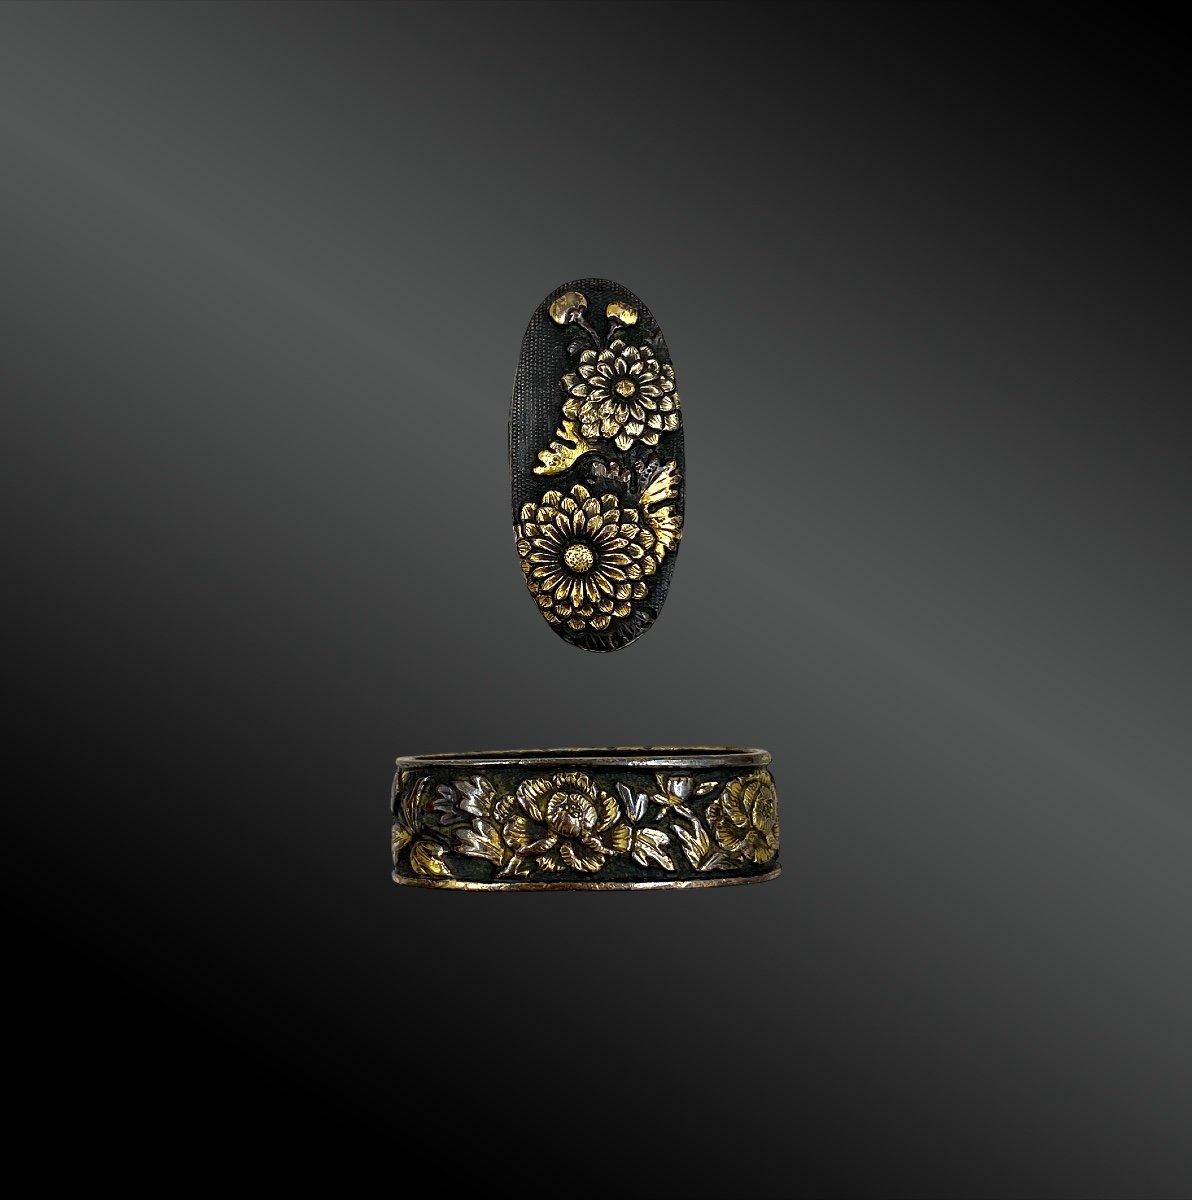 Fuchi Kashira, With The Pattern Of The Peony In Bloom. Japan - Edo Period (1603 - 1868), 19th Century 